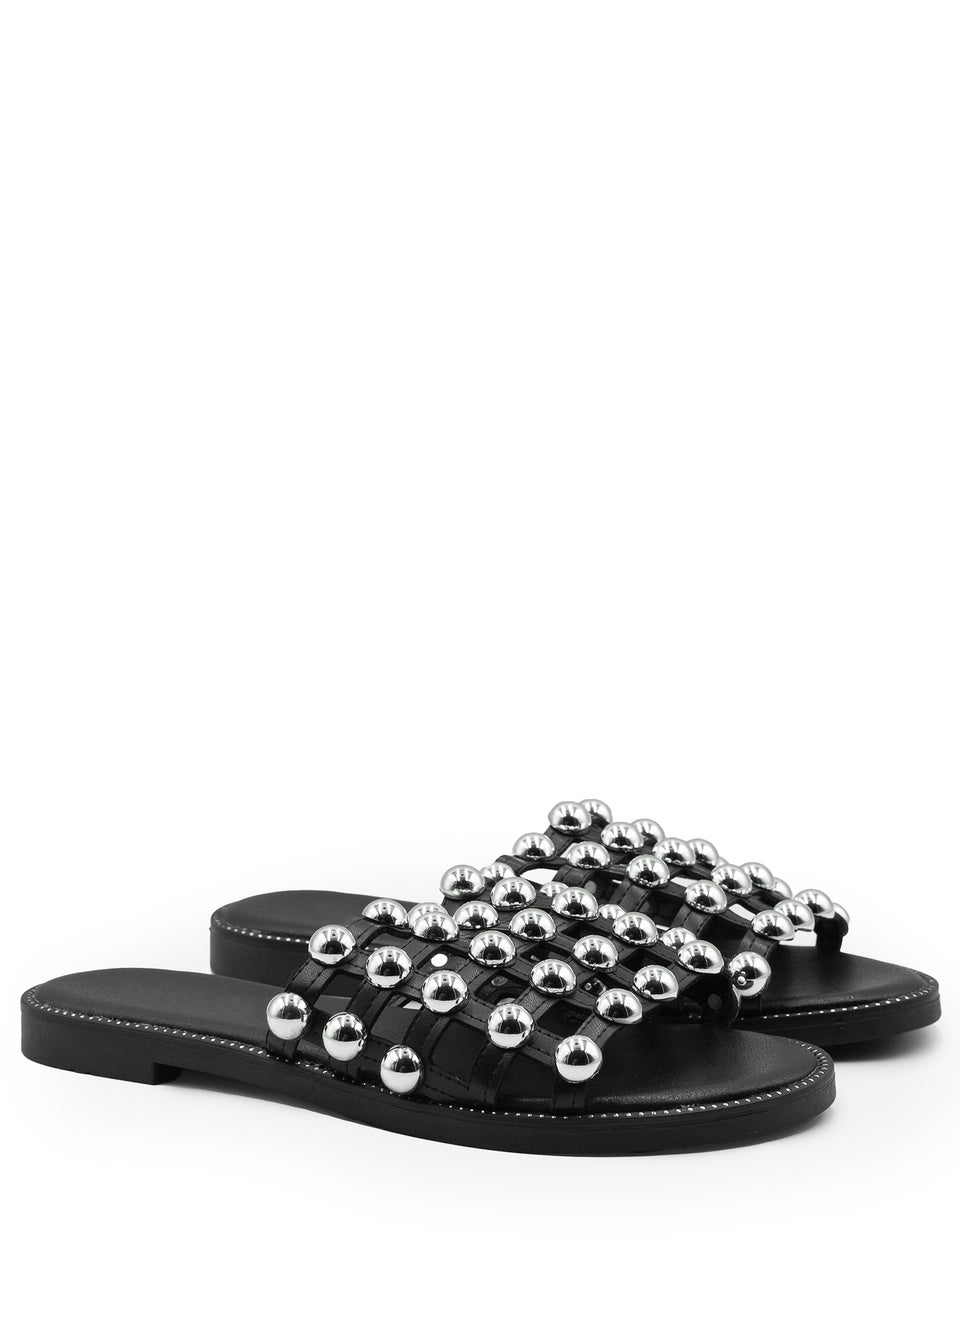 Where's That From Black Kellie Wide Fit PU Studded Sandals